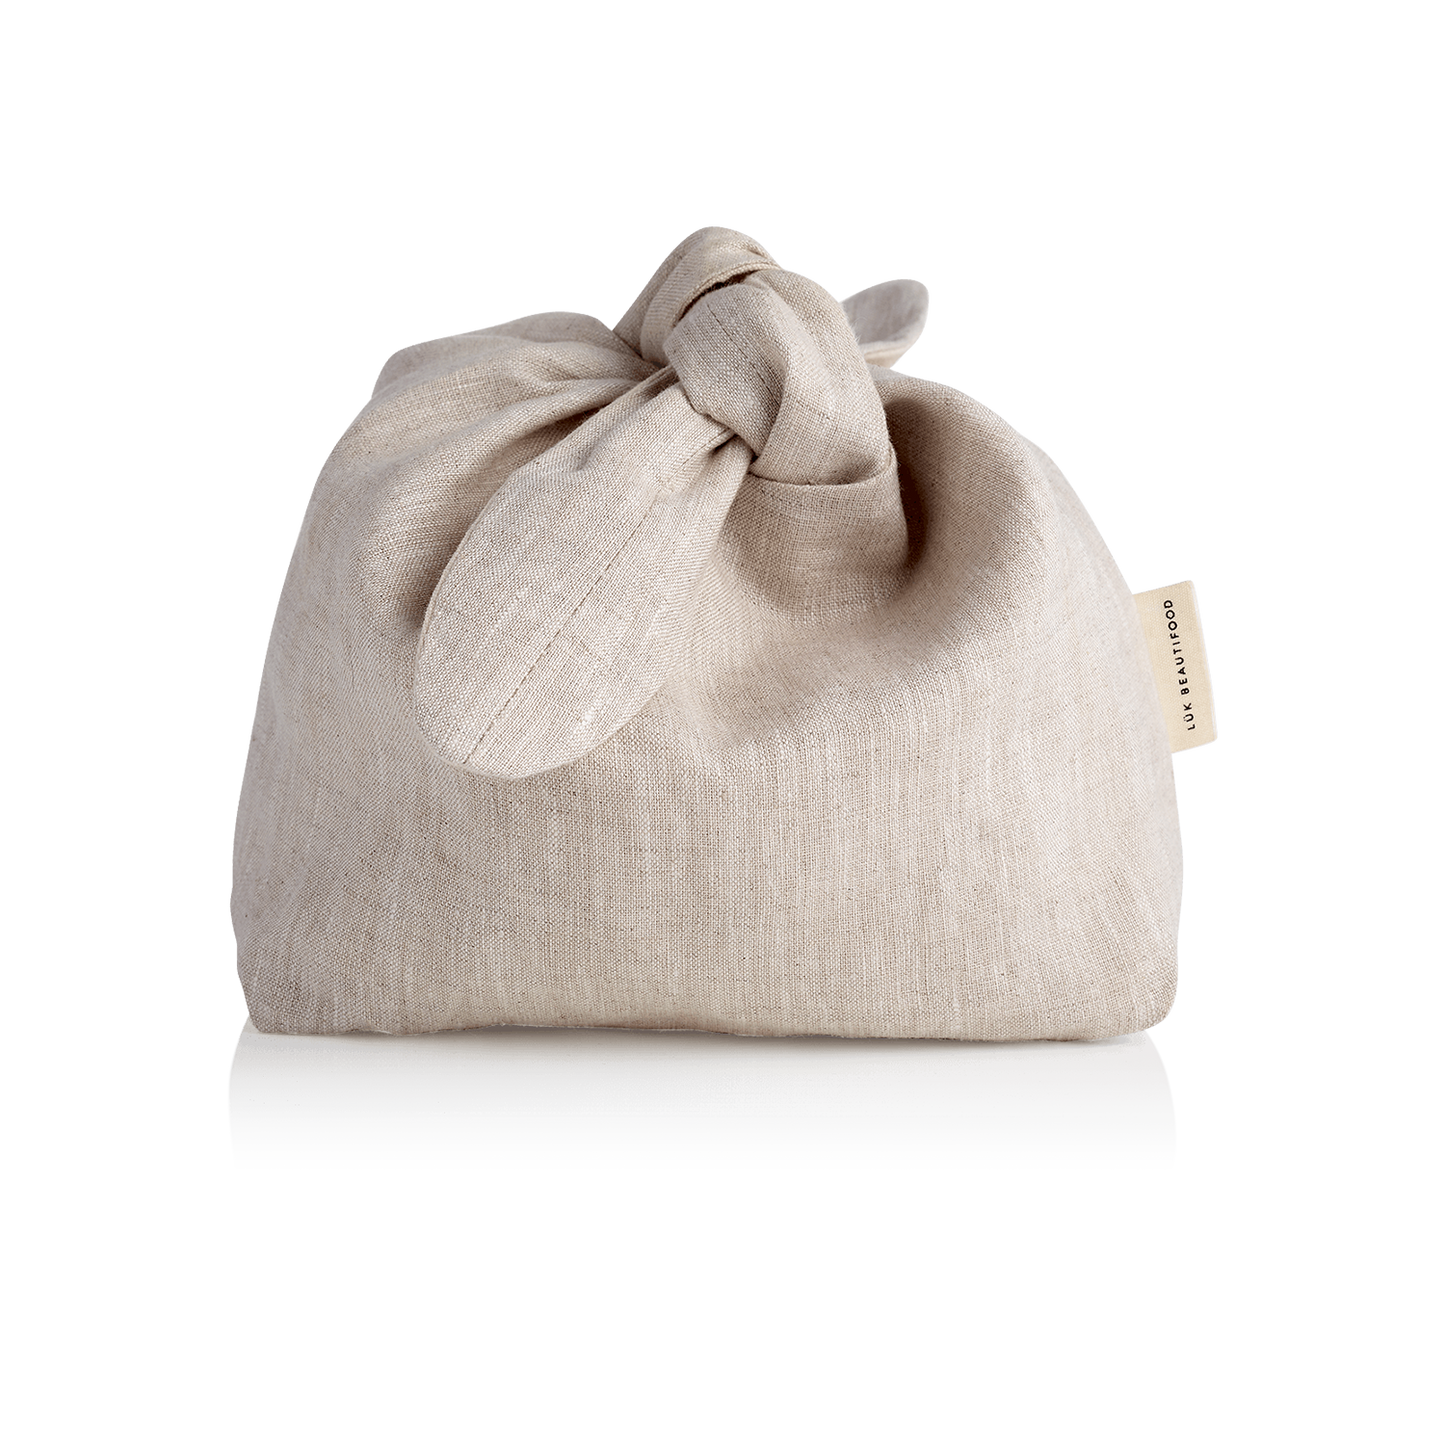 100% Linen Bento Bag for gifting your purchases